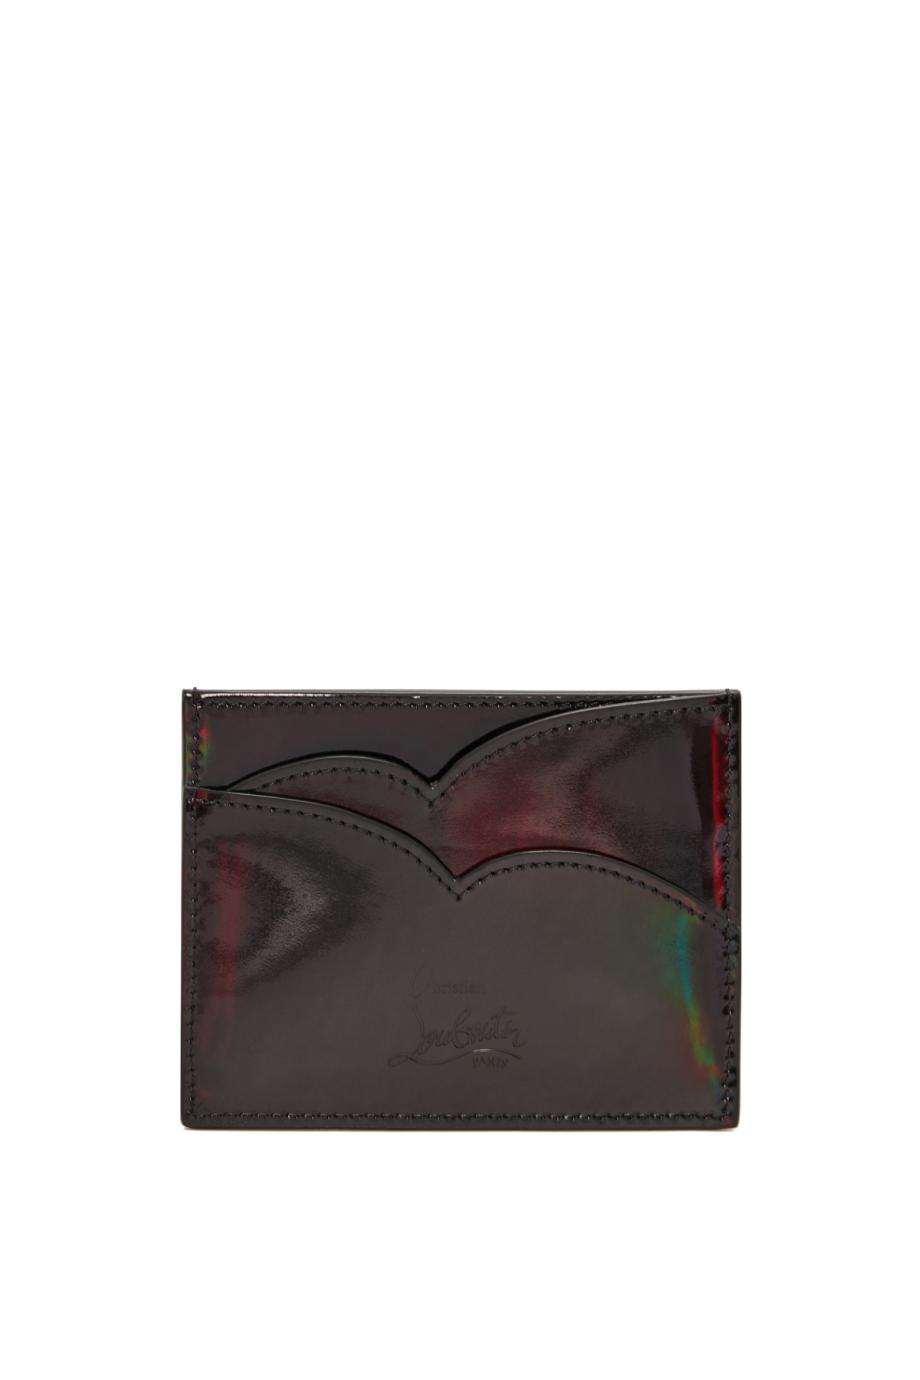 Hot Chick patent-leather cardholder